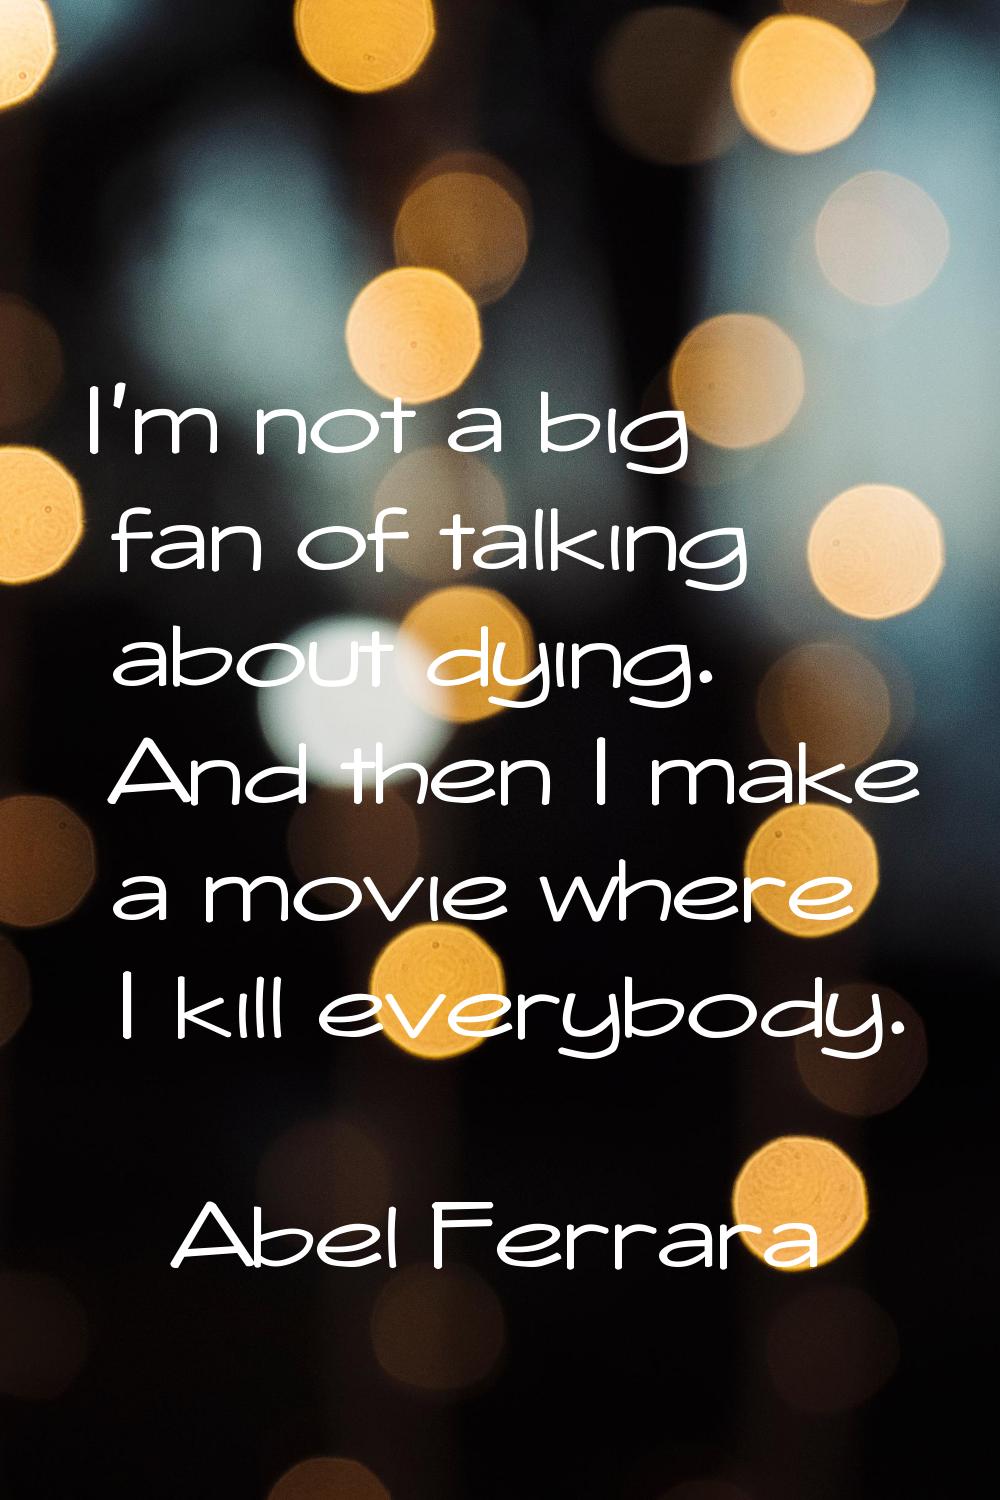 I'm not a big fan of talking about dying. And then I make a movie where I kill everybody.